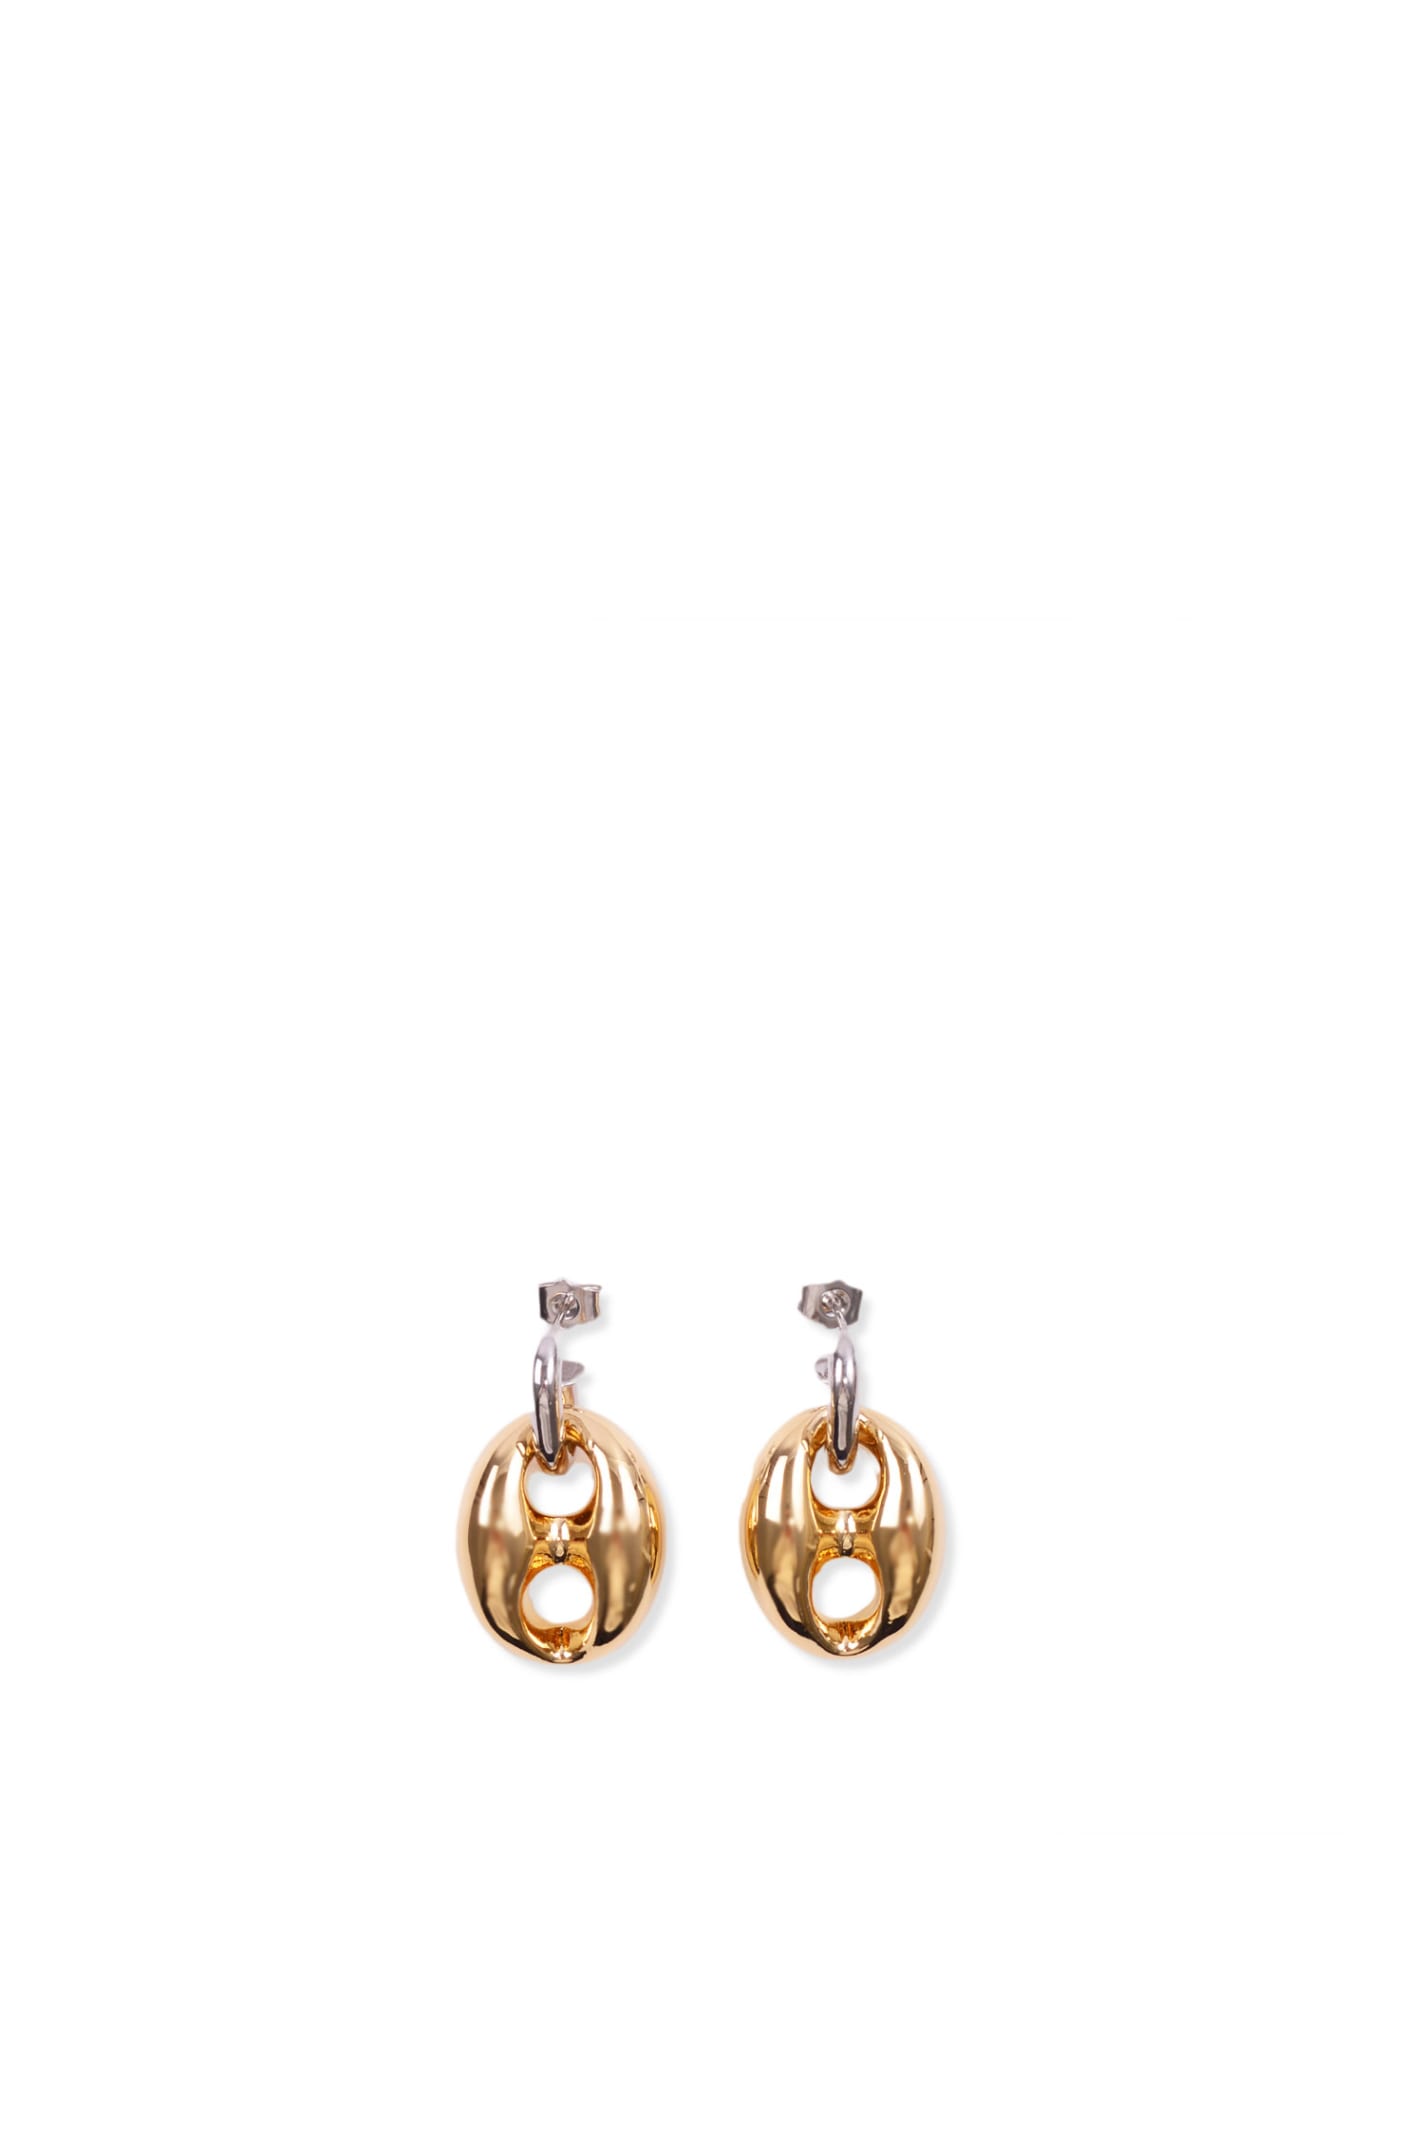 Paco Rabanne Shiny Earrings In Gold-colored Aluminum And Brass